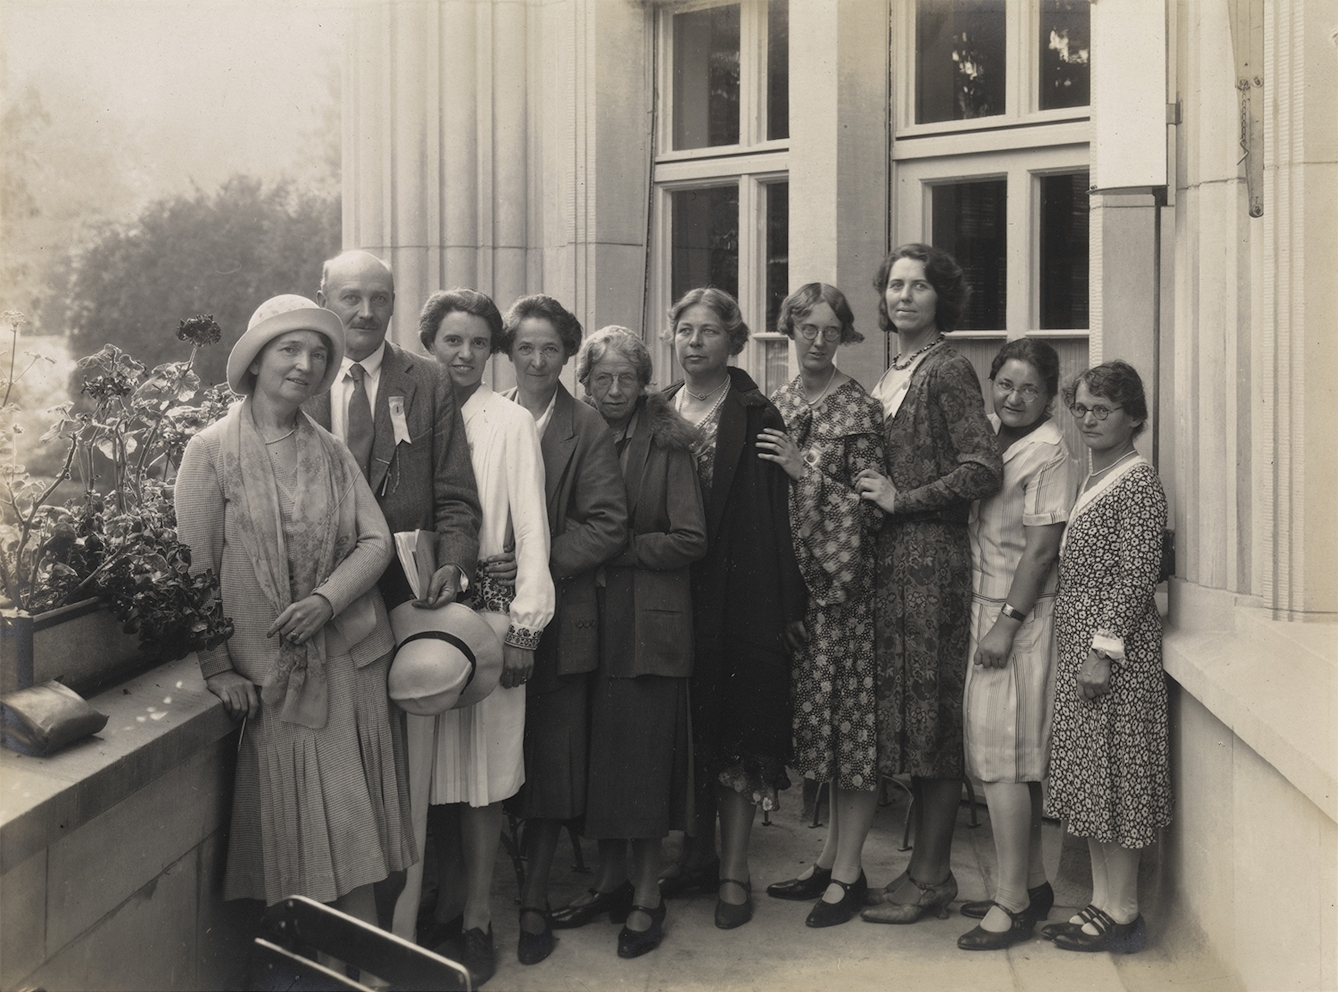 The Zurich Birth Control Conference, Sept 1930. Margaret Sanger is on the far left. Image credit: Wellcome Library.